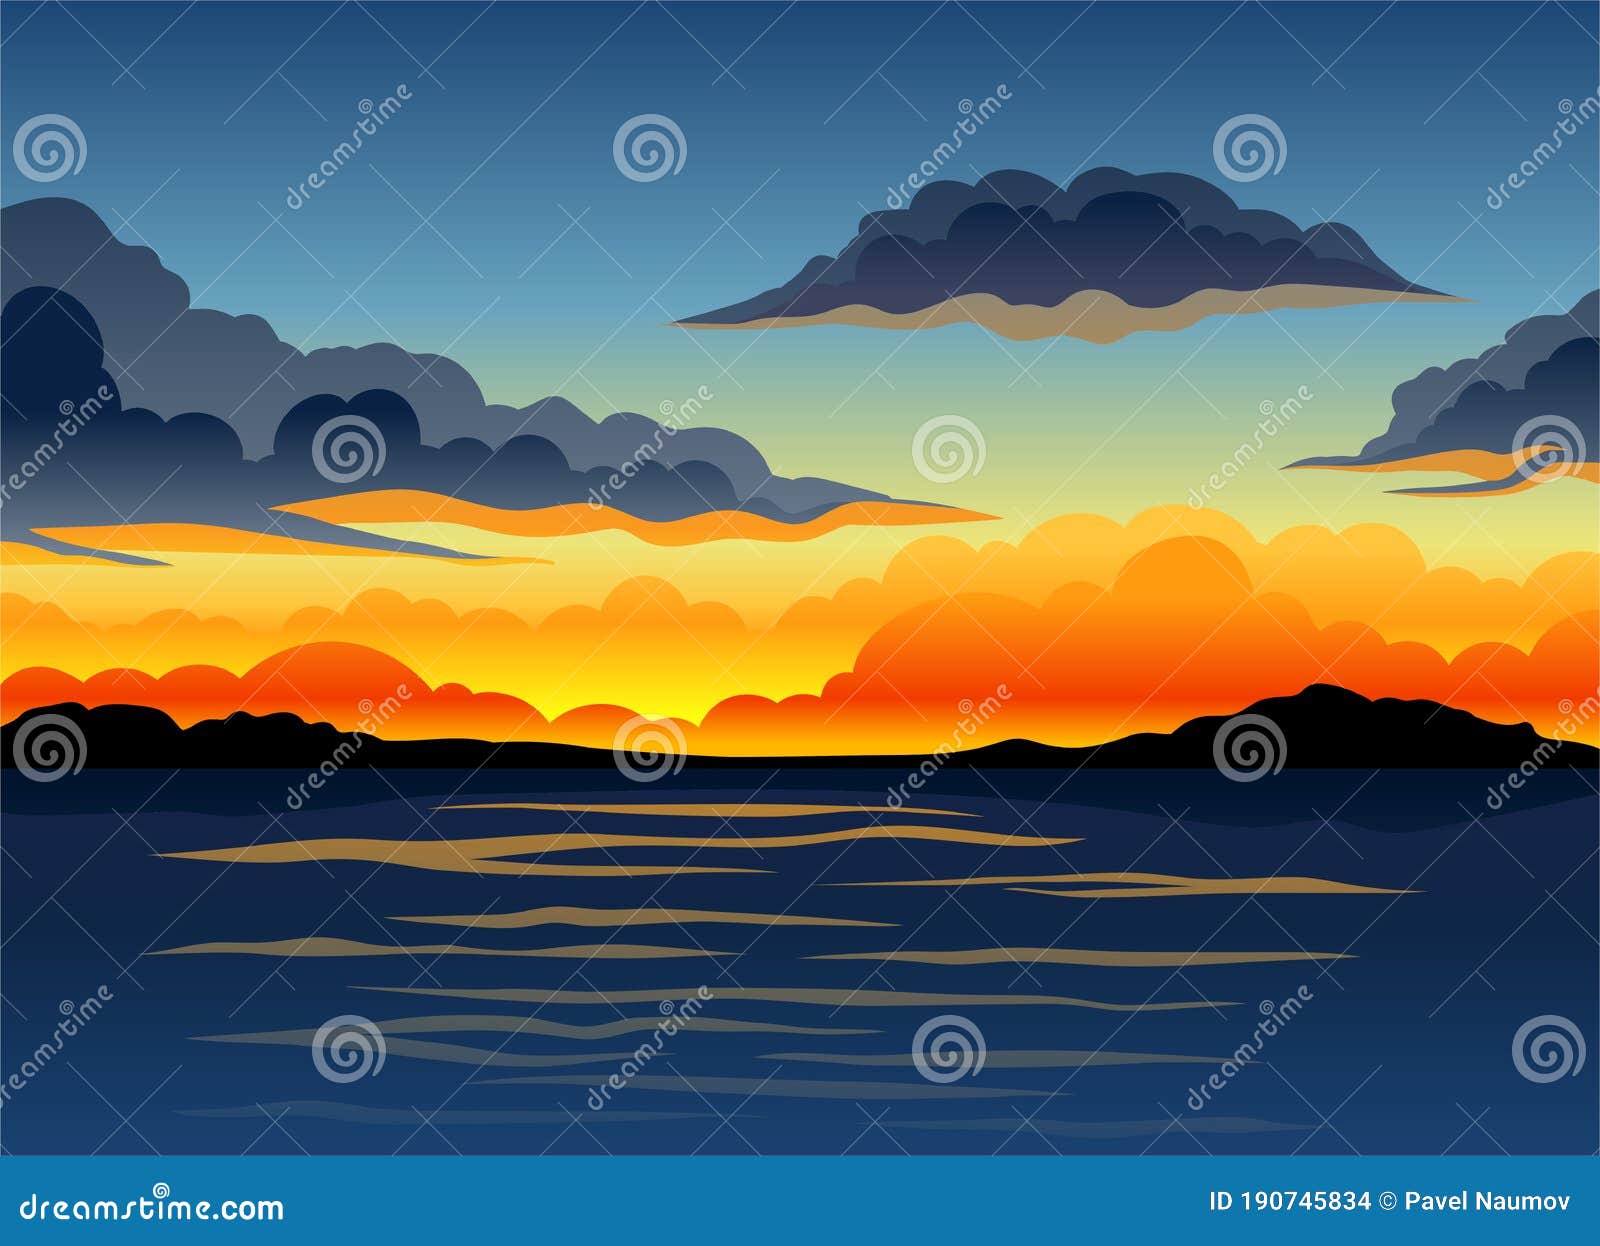 picturesque nature landscape with sunset and water view  